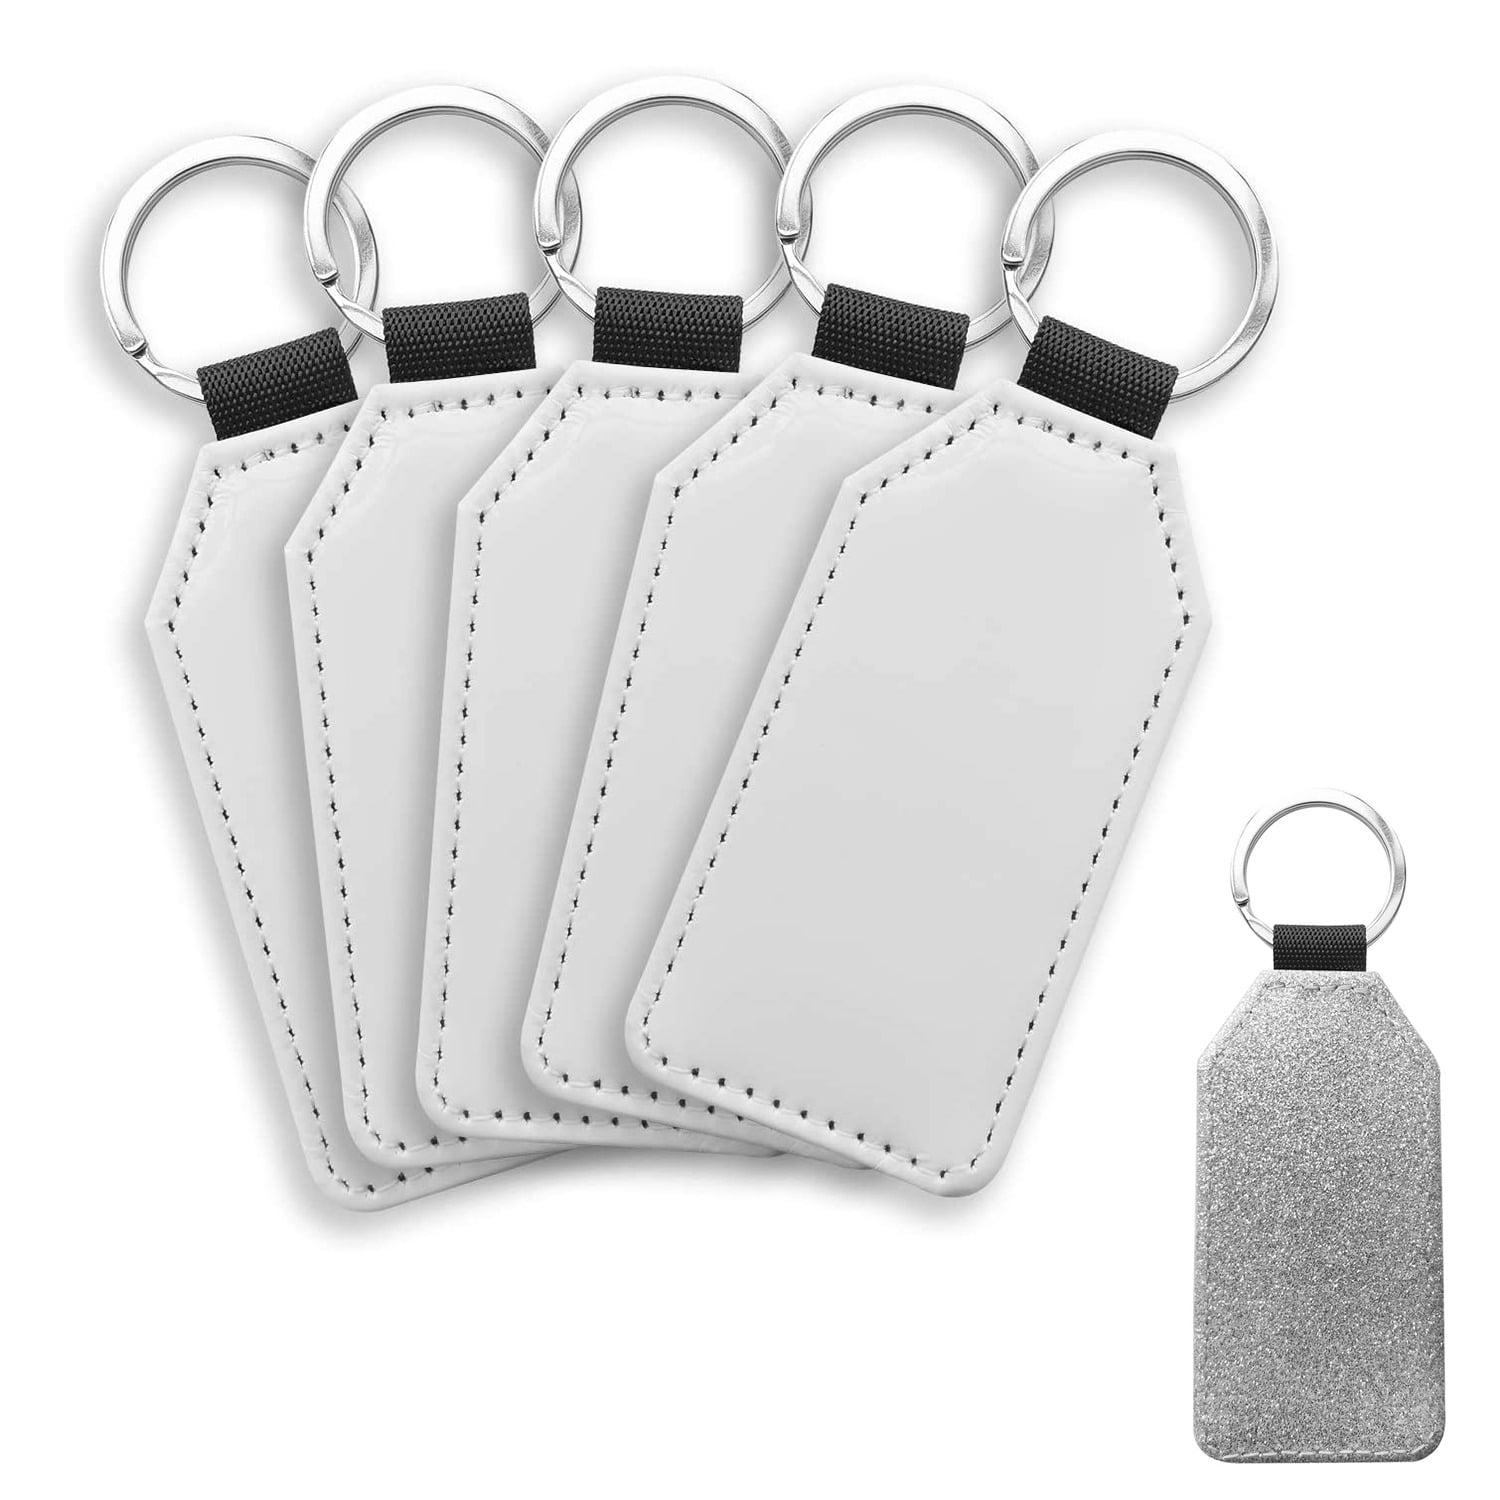 2 of each style sublimation blank color of your choice! 10 Pack of glitter key chains for sublimation FREE SHIPPING!